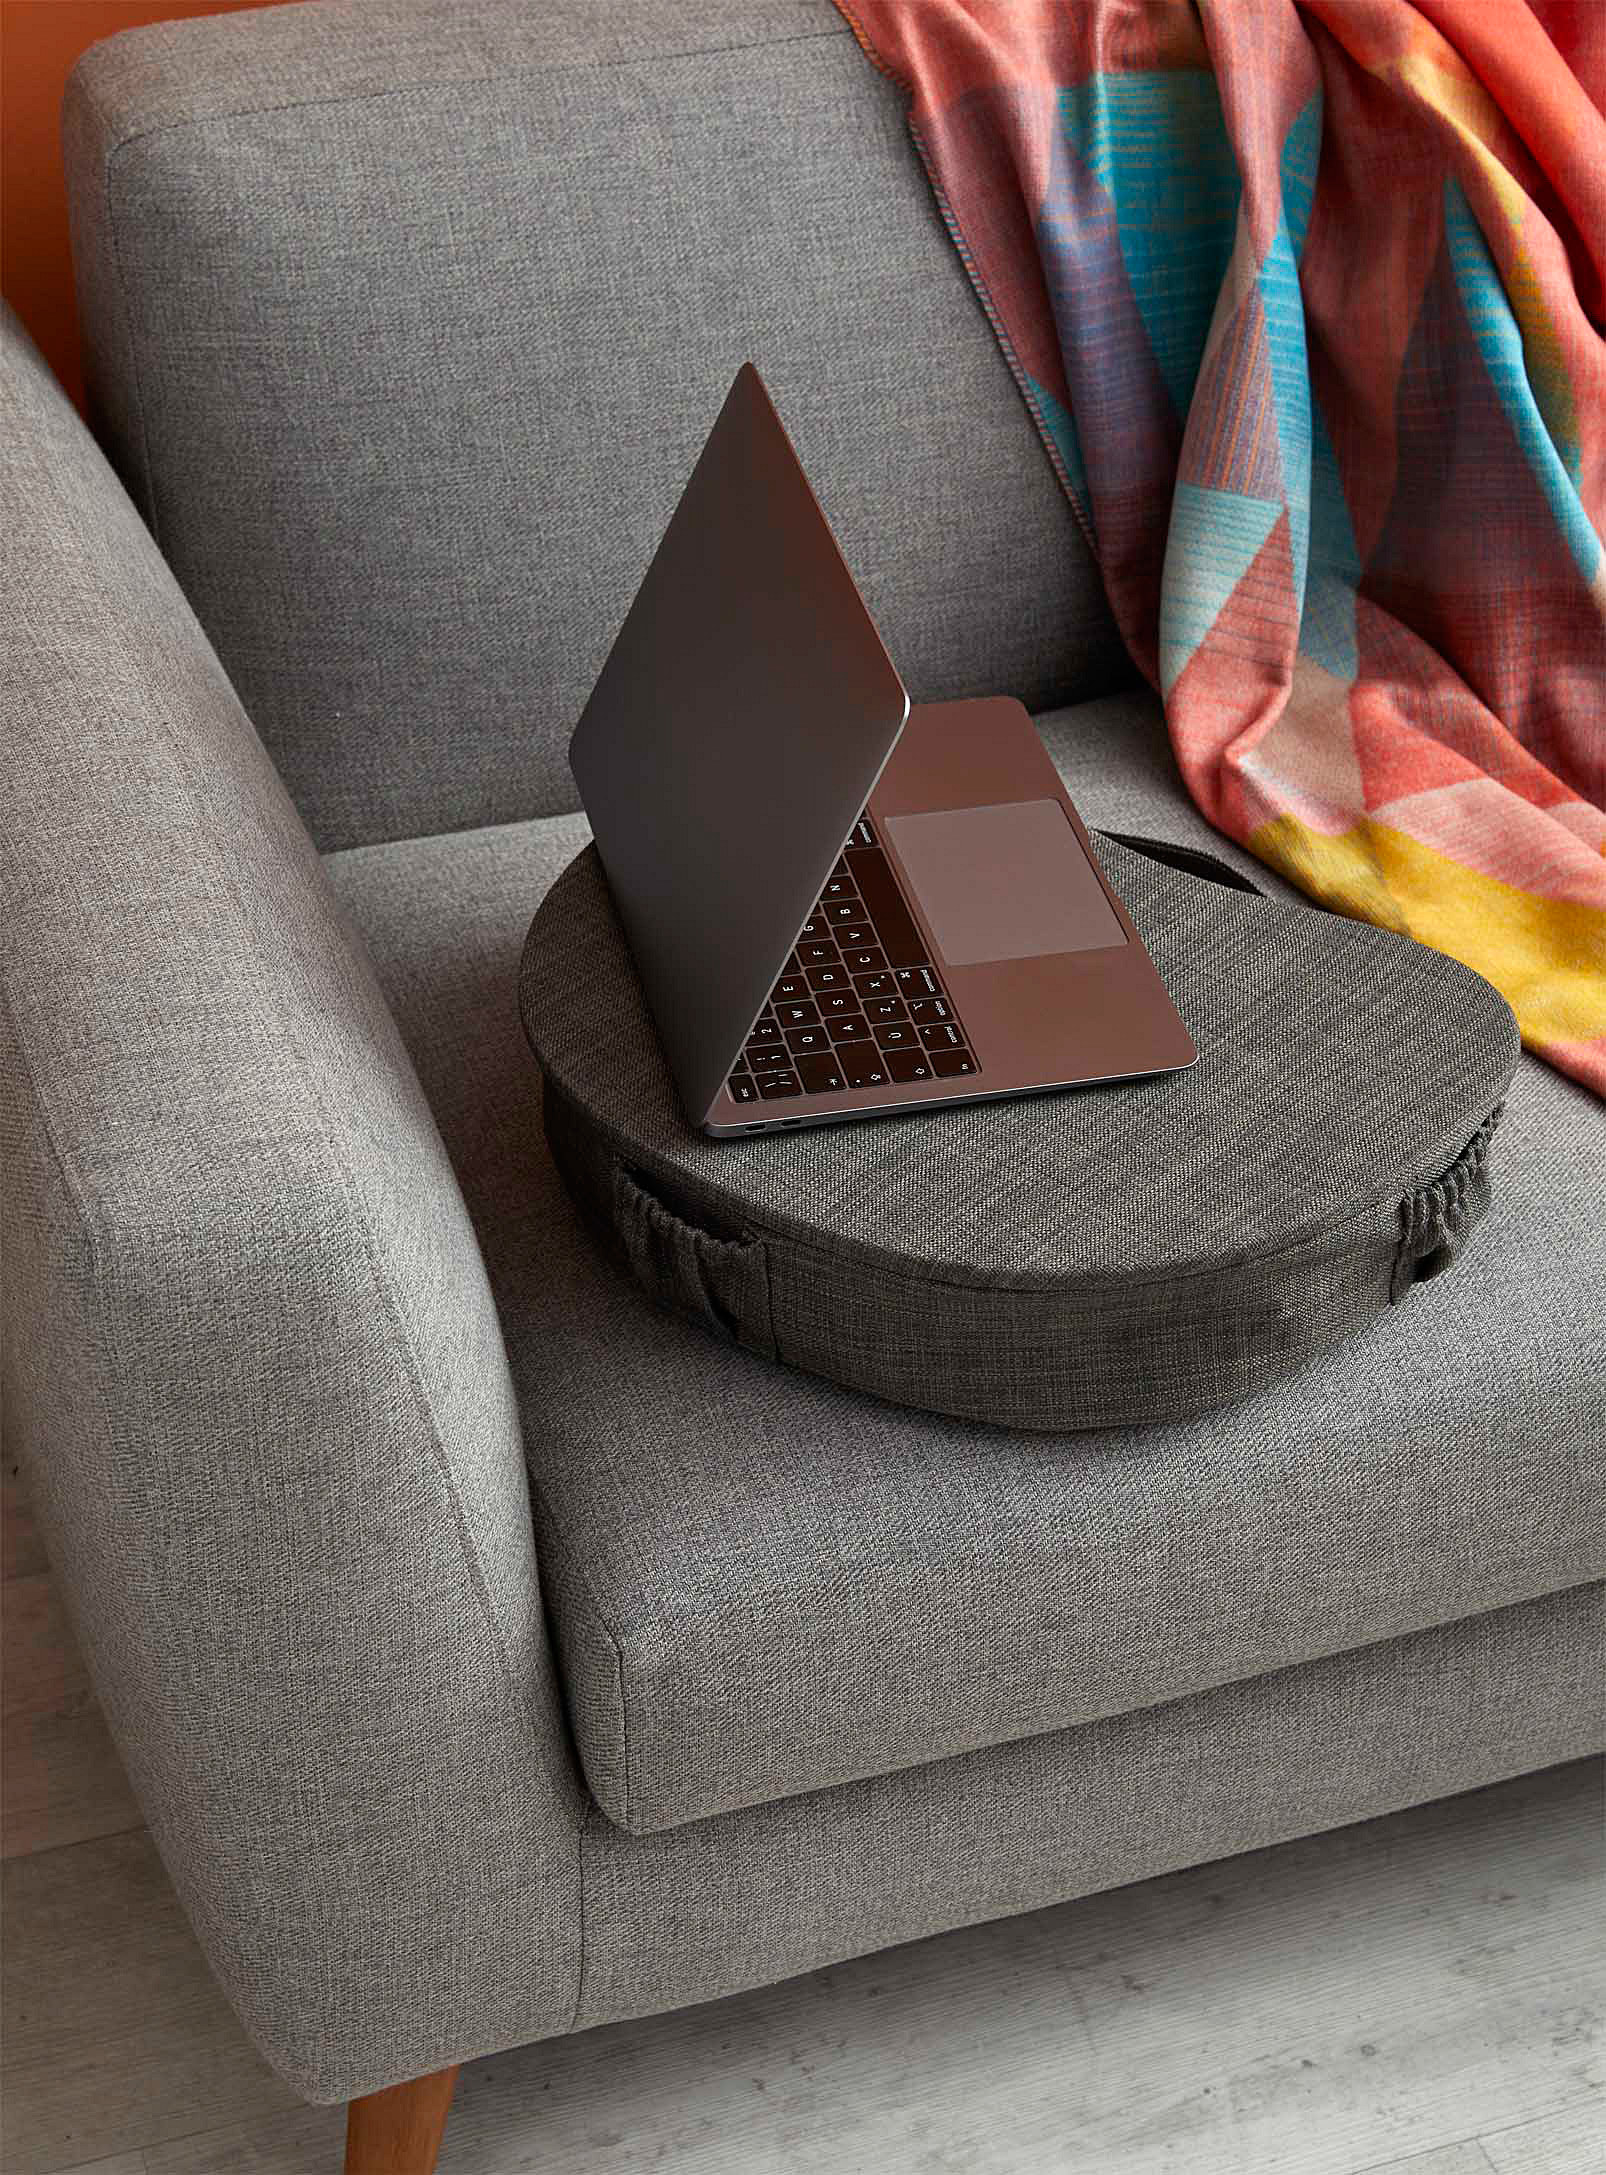 laptop shelf on couch